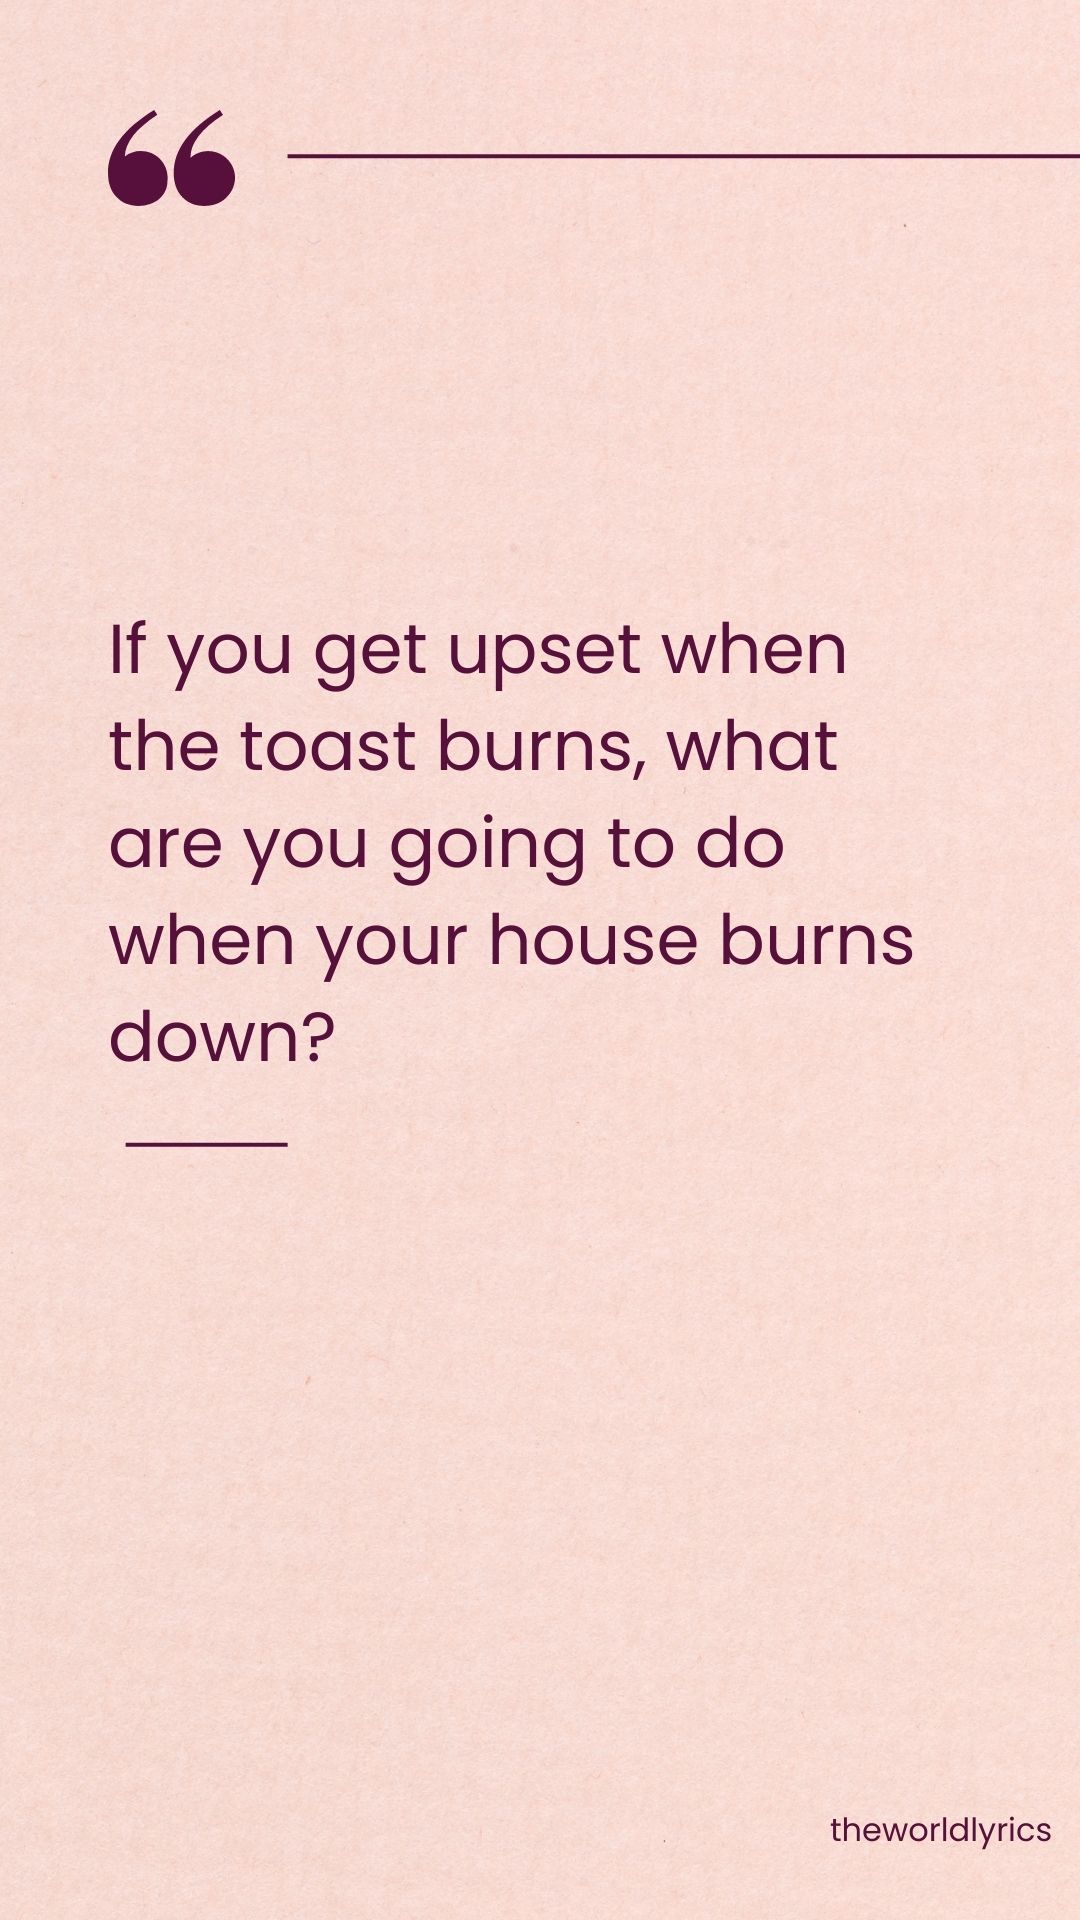 If you get upset when the toast burns what are you going to do when your house burns down